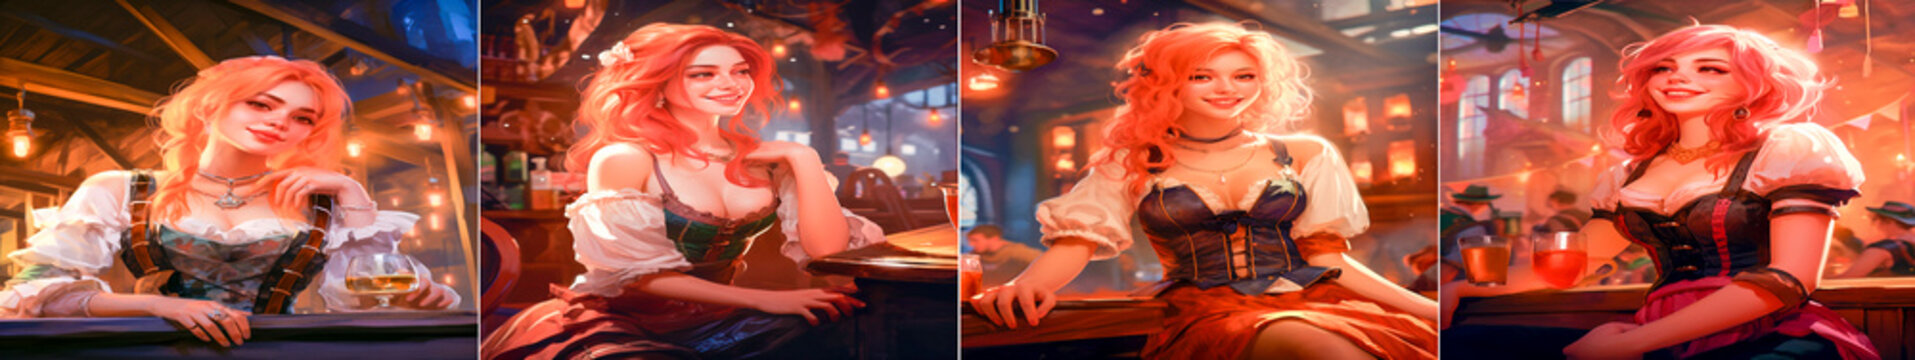 A young girl with a thin figure and pink hair. Wears bright and colorful clothes. Dressed in Victorian era attire. Sits in a tavern and laughs.